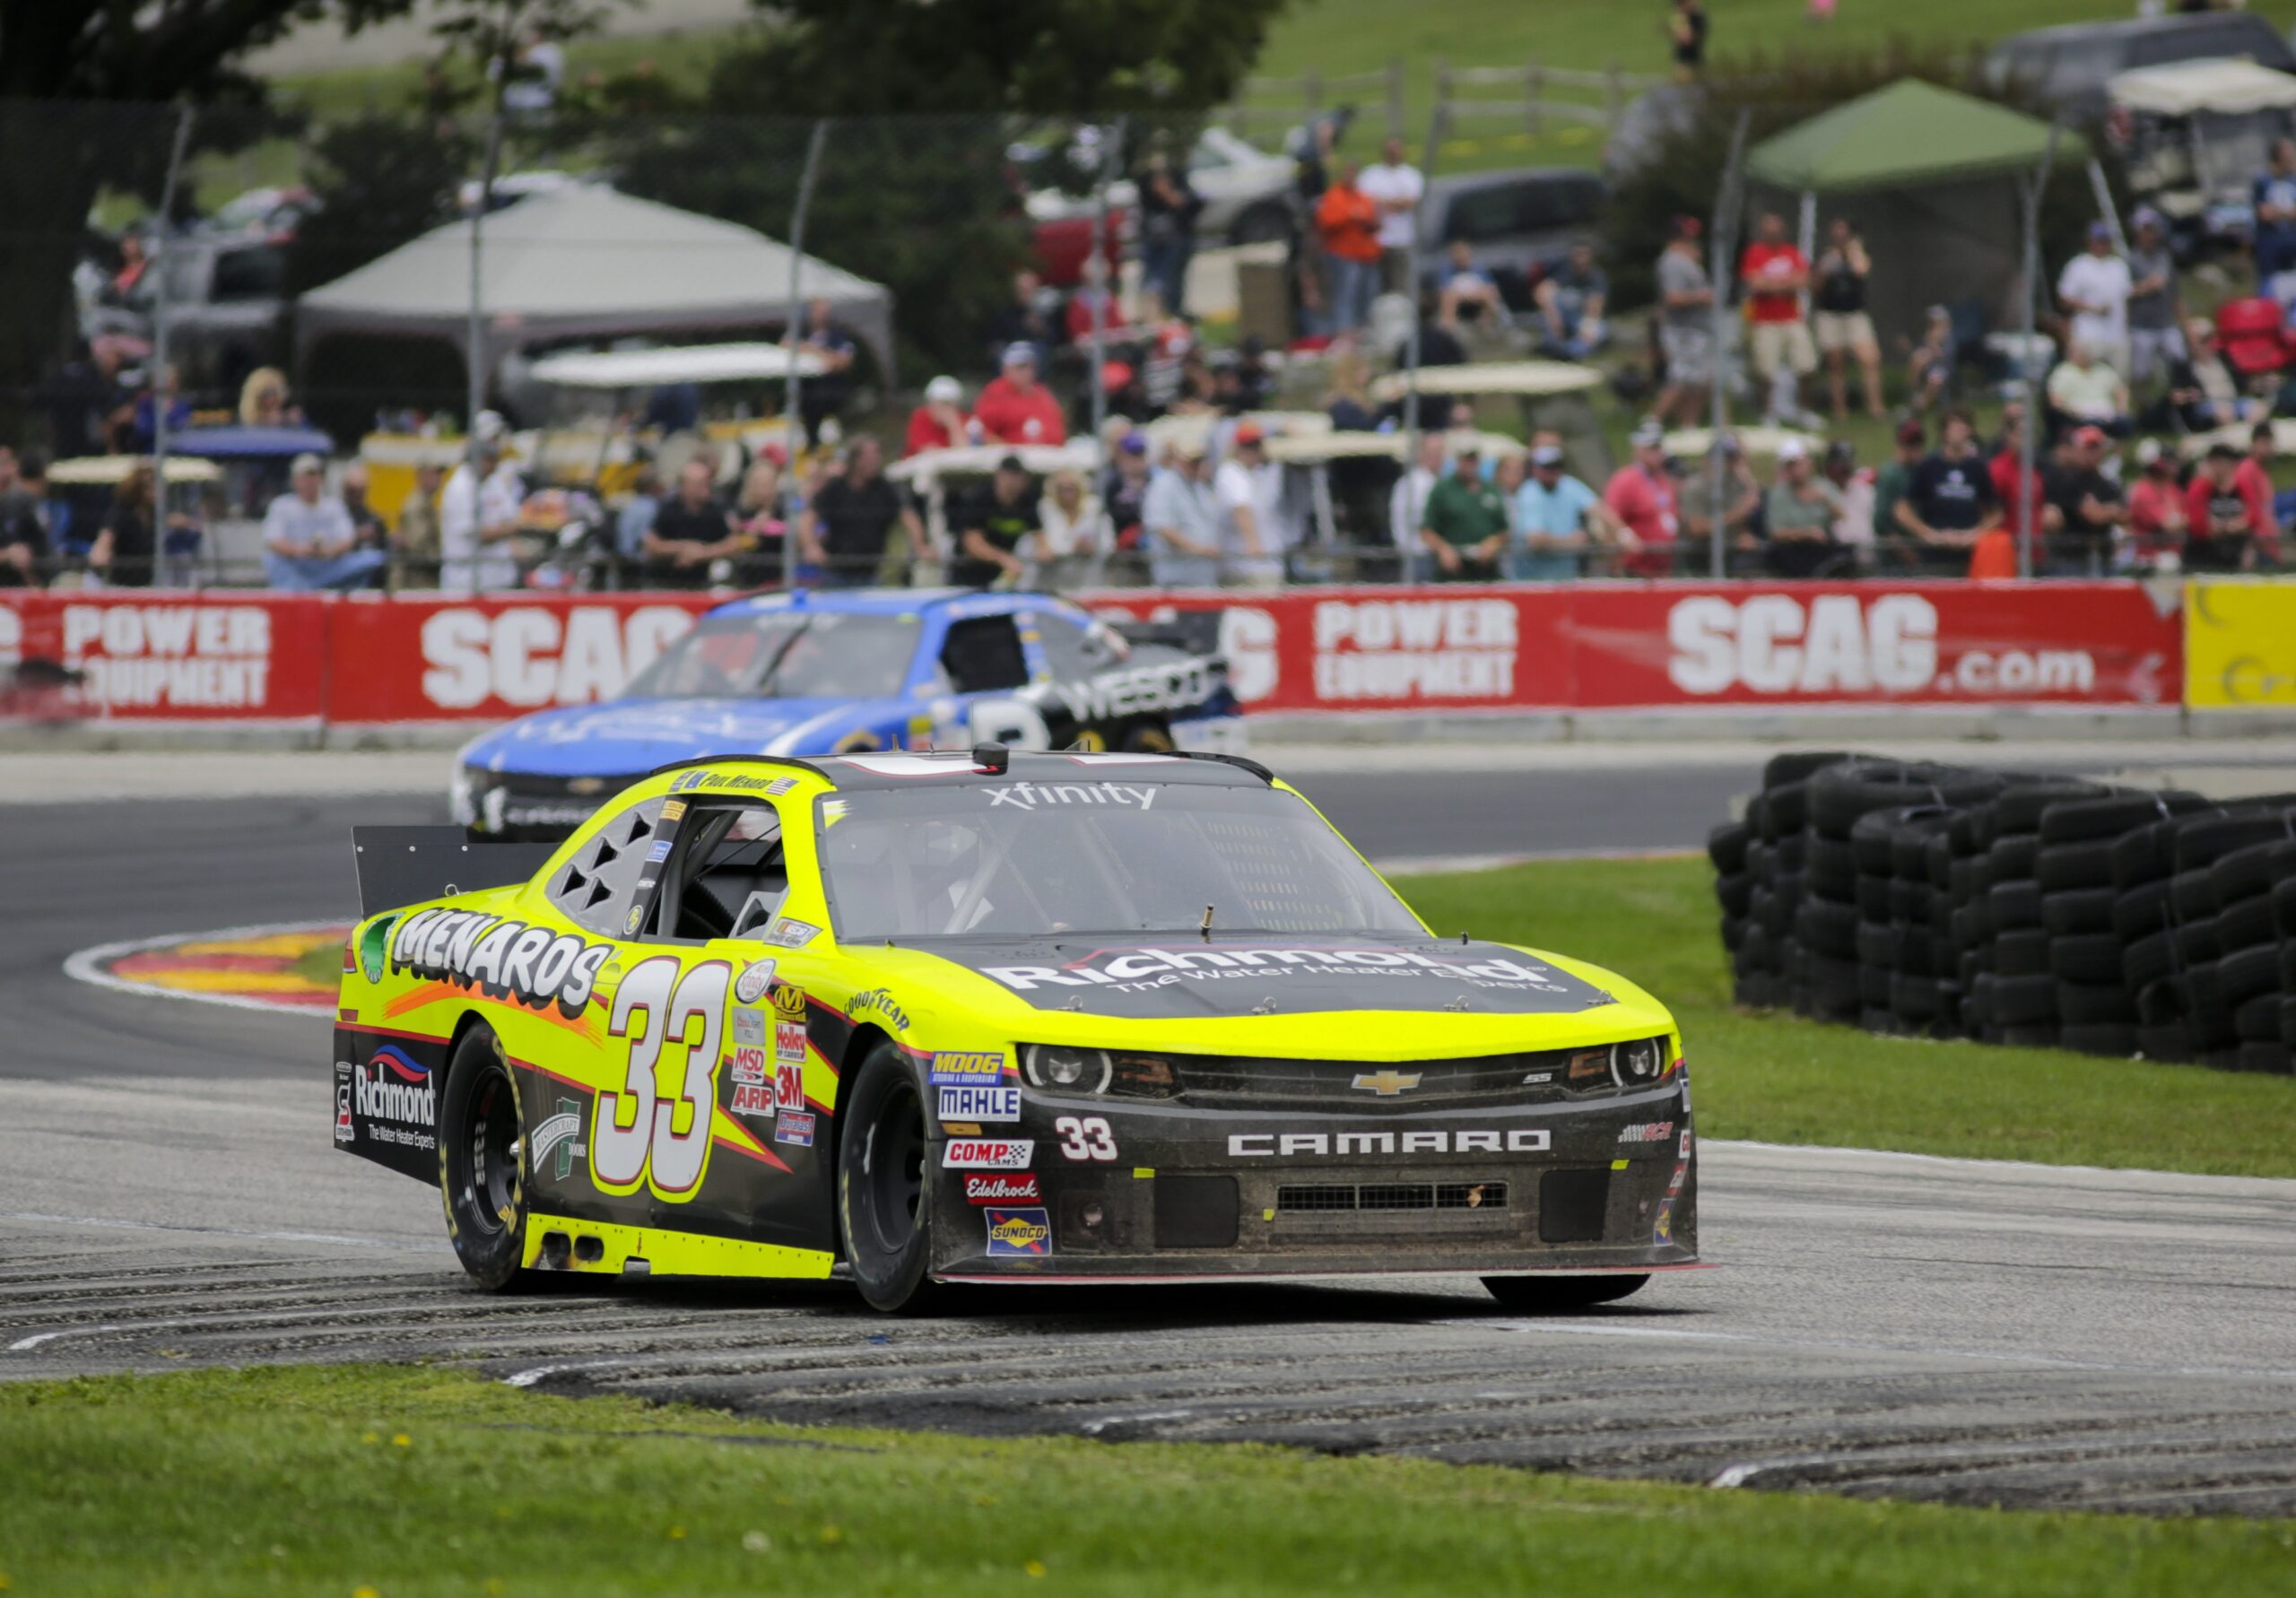 Paul Menard competes in a NASCAR race at Road America